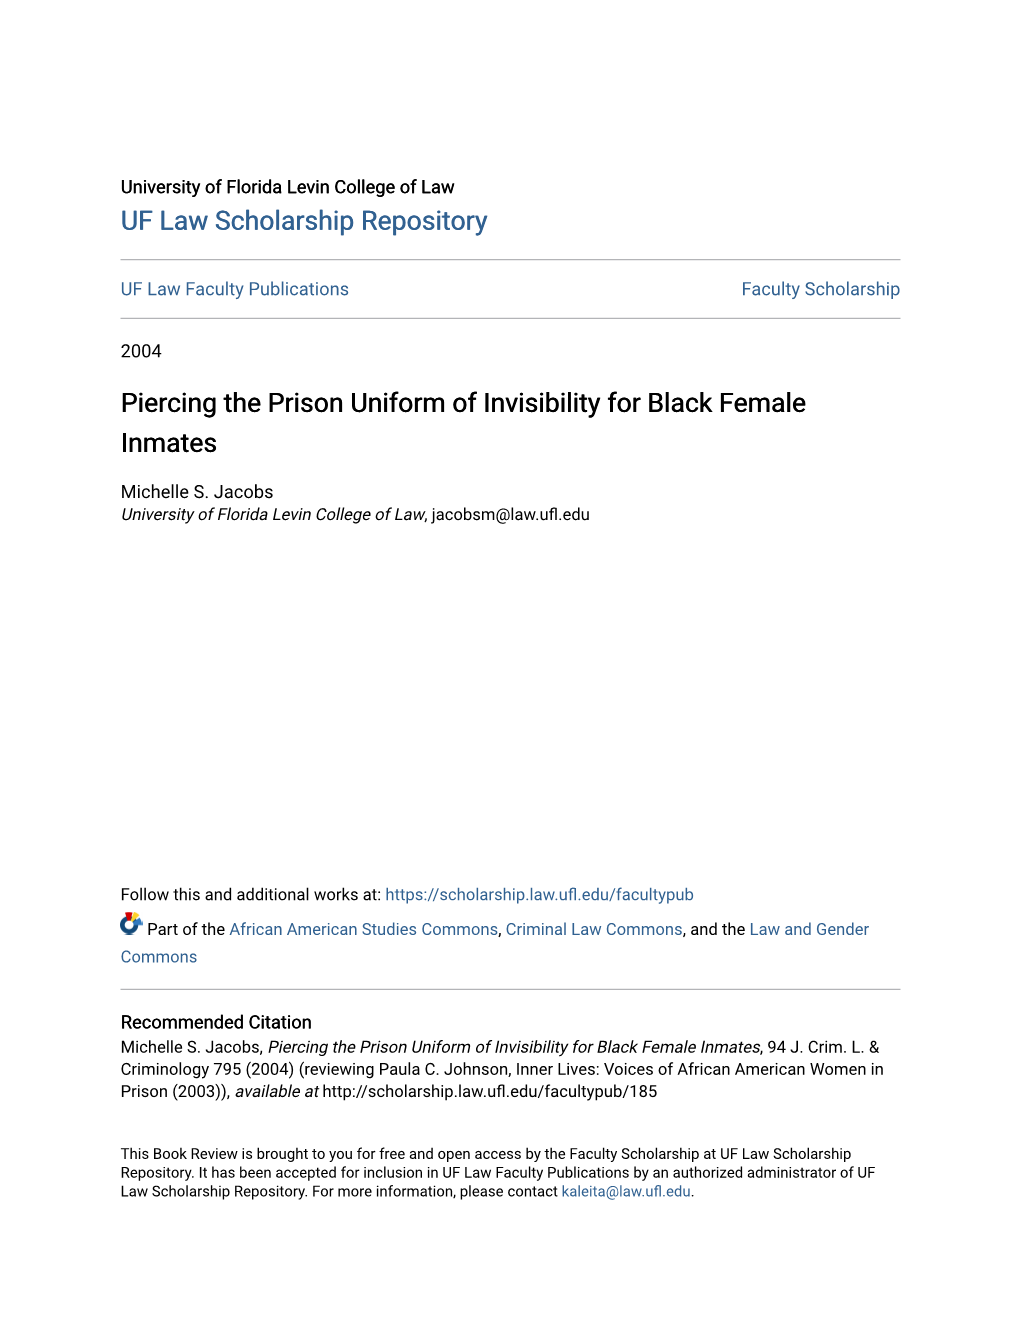 Piercing the Prison Uniform of Invisibility for Black Female Inmates